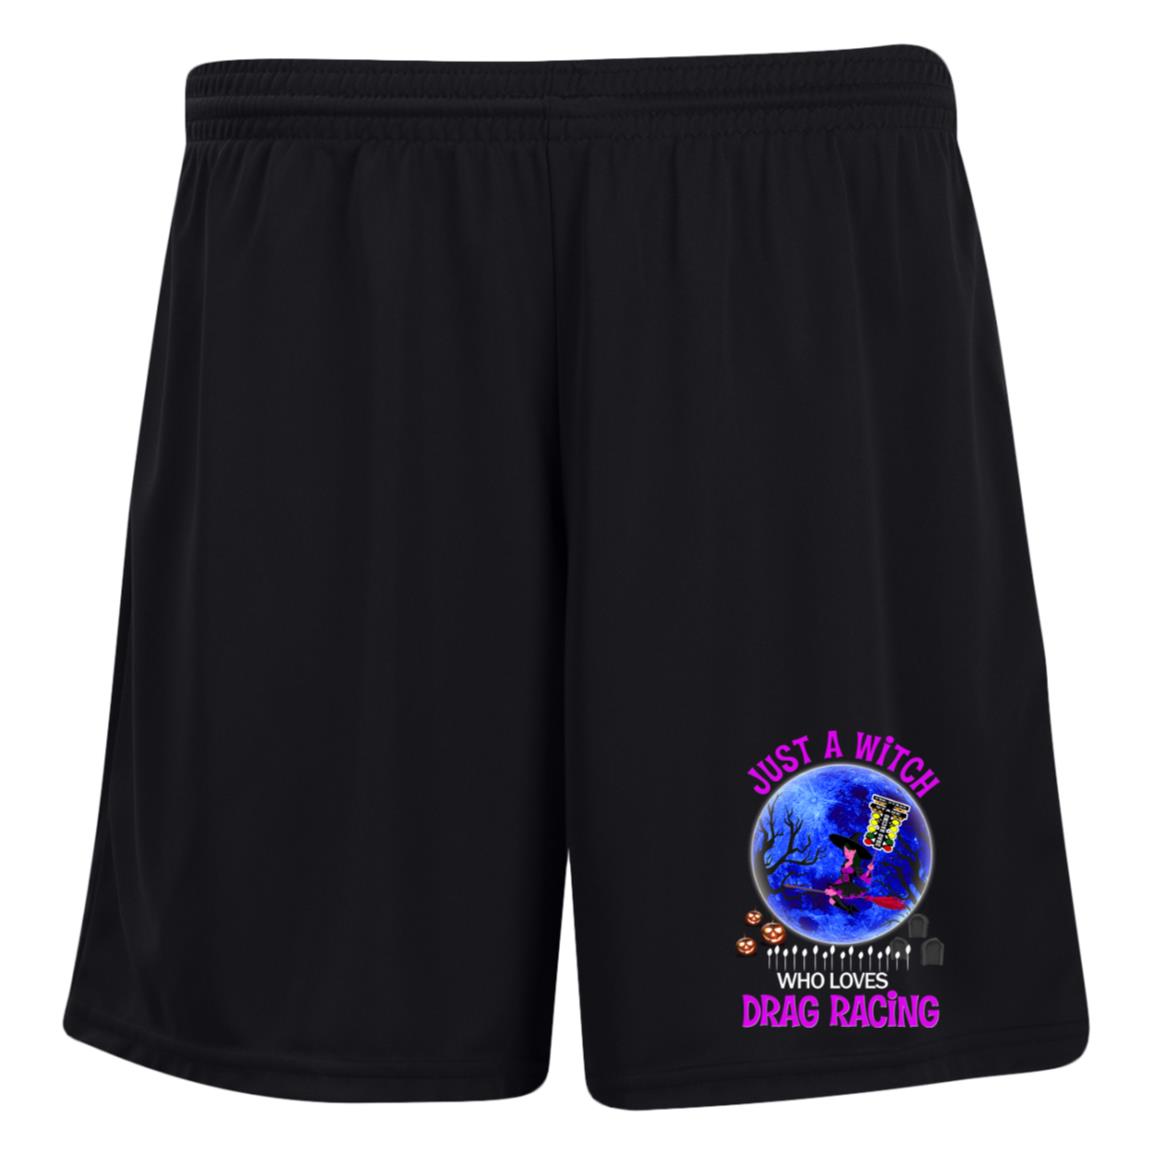 Just A Witch Who Loves Drag Racing Ladies' Moisture-Wicking 7 inch Inseam Training Shorts